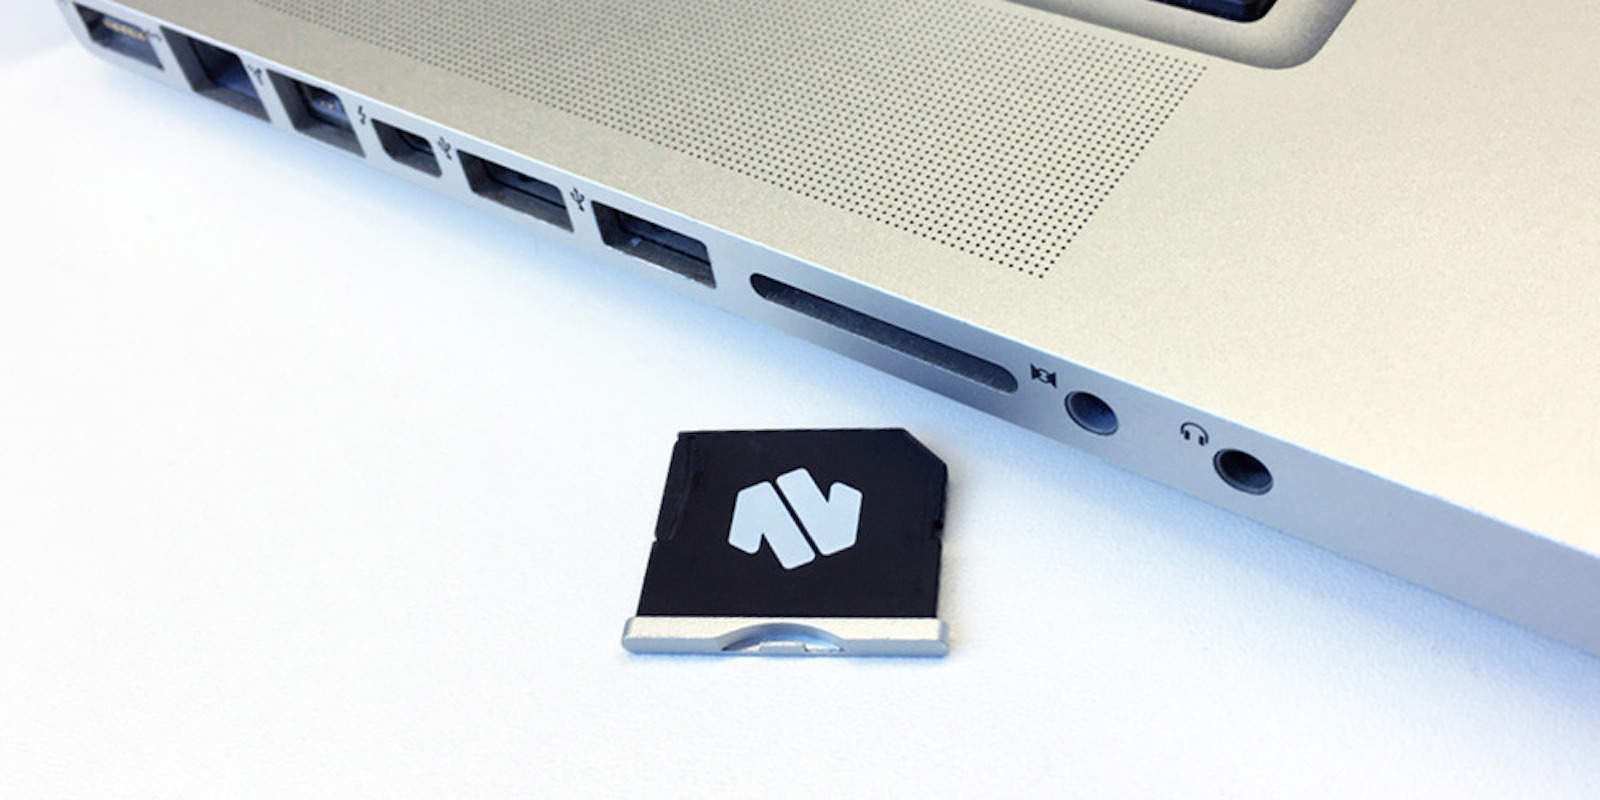 Conveniently add up to 200GB of storage to your Macbook without a bulky hard drive